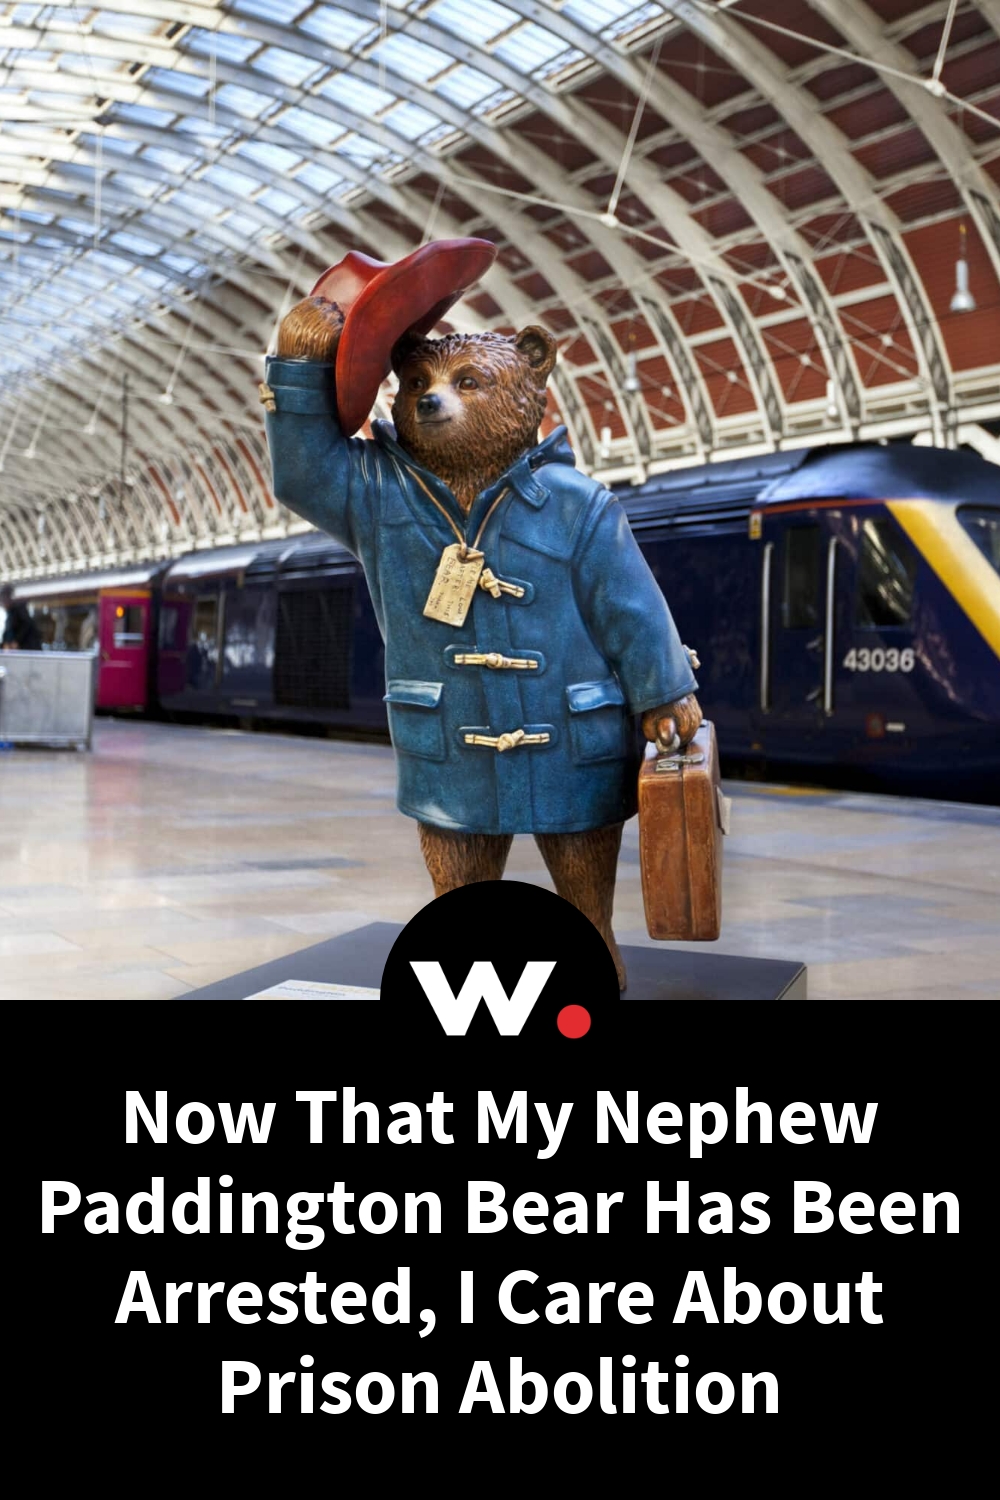 Now That My Nephew Paddington Bear Has Been Arrested, I Care About Prison Abolition